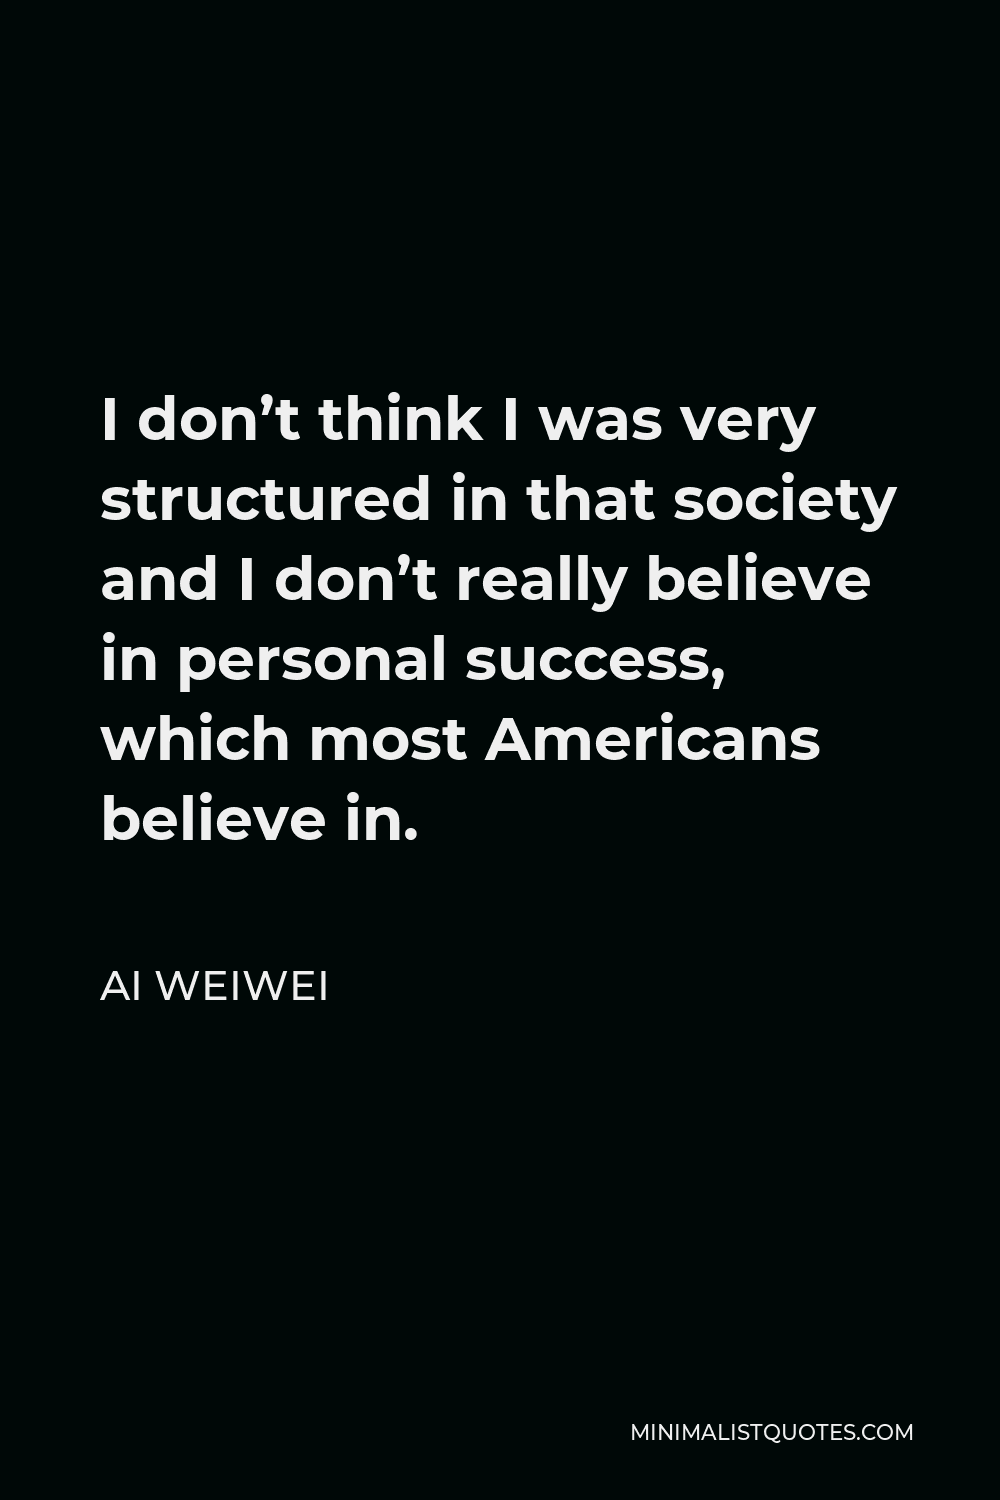 Ai Weiwei Quote - I don’t think I was very structured in that society and I don’t really believe in personal success, which most Americans believe in.